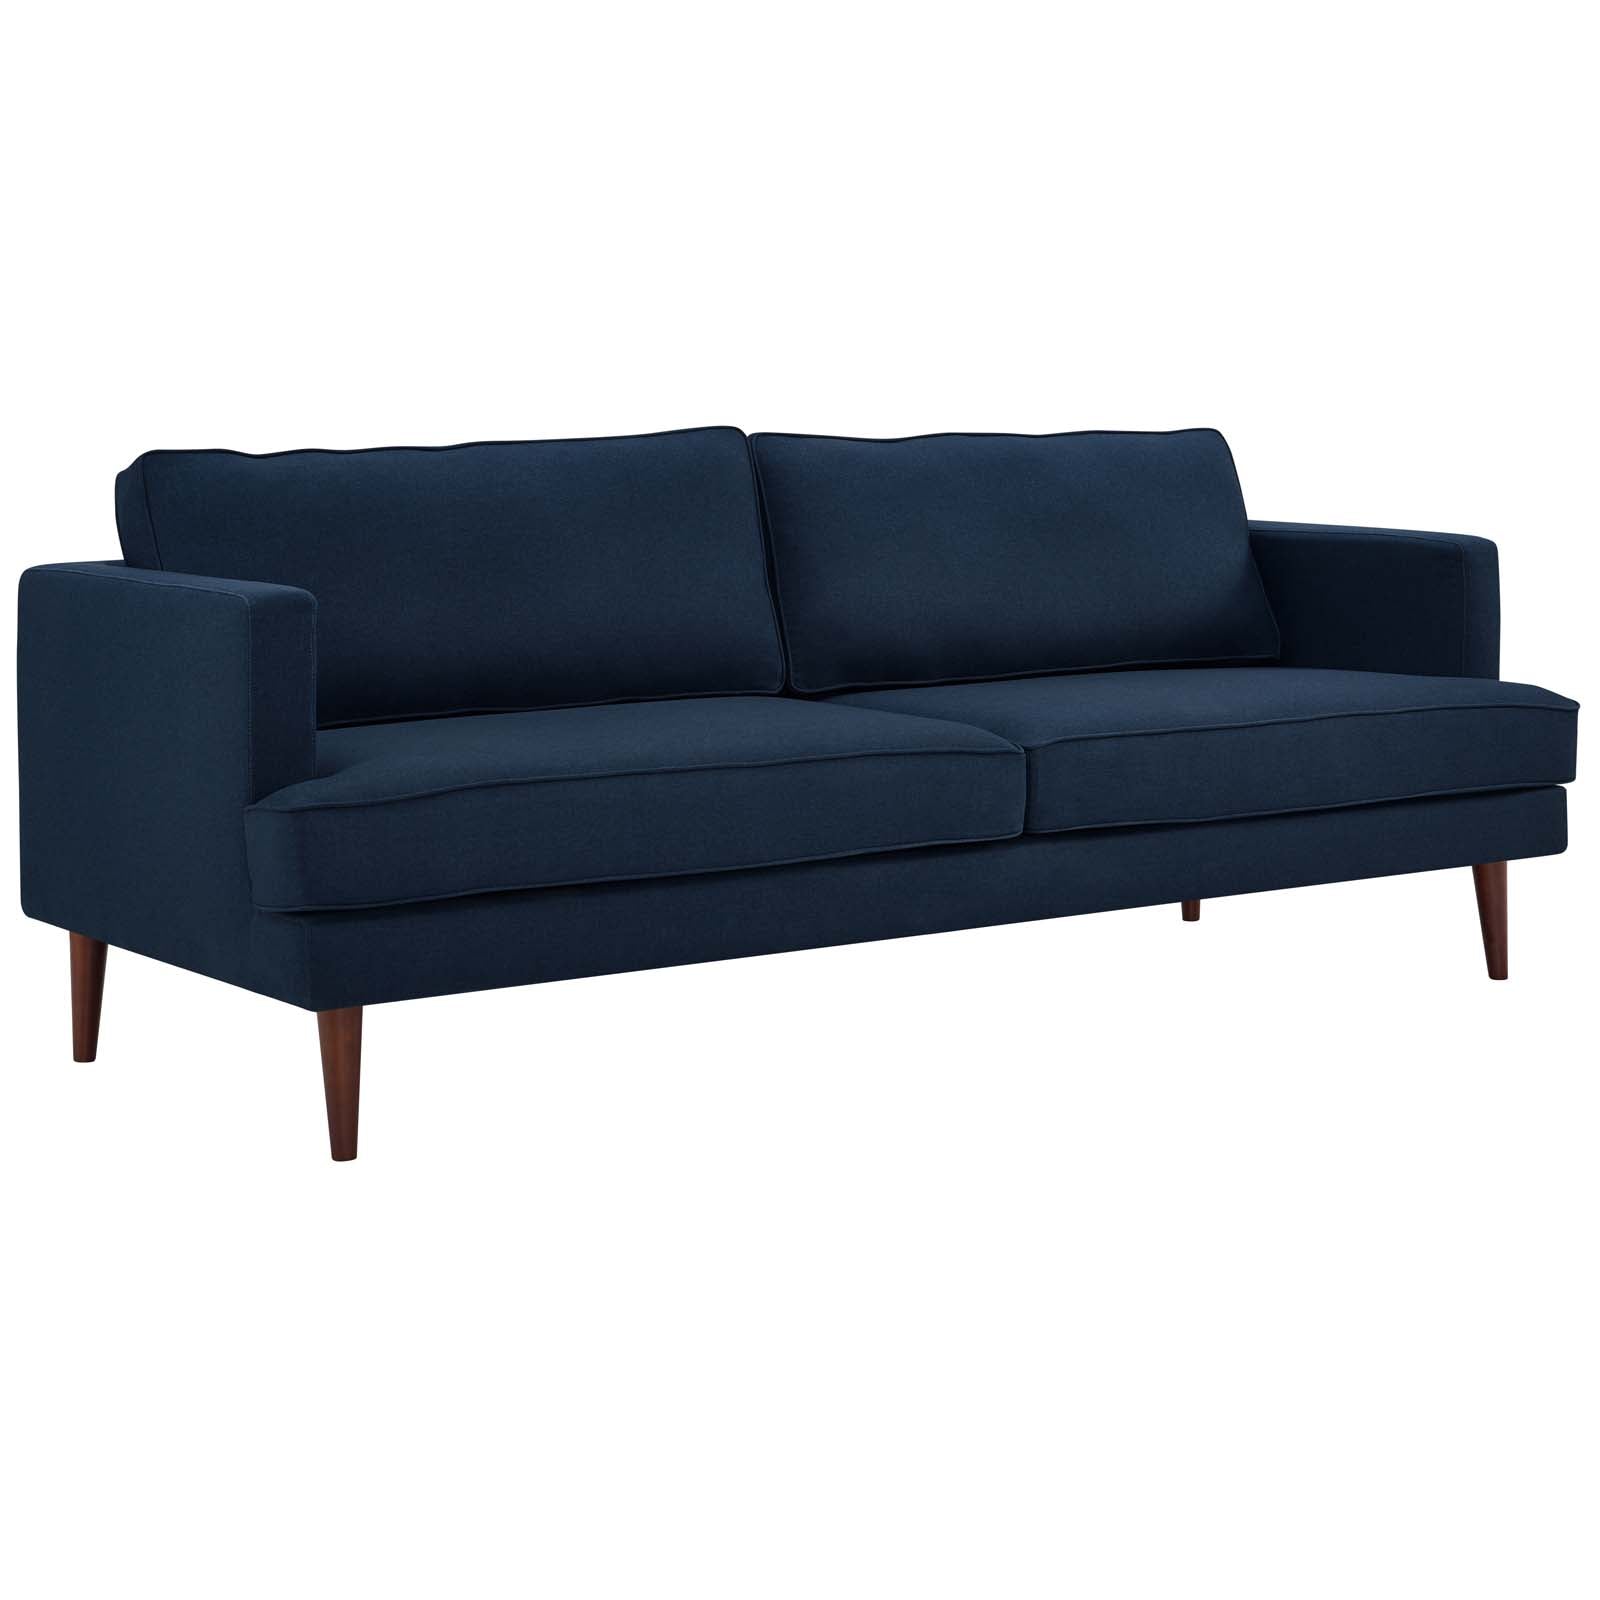 Modway Sofas & Couches - Agile Upholstered Fabric Sofa Blue